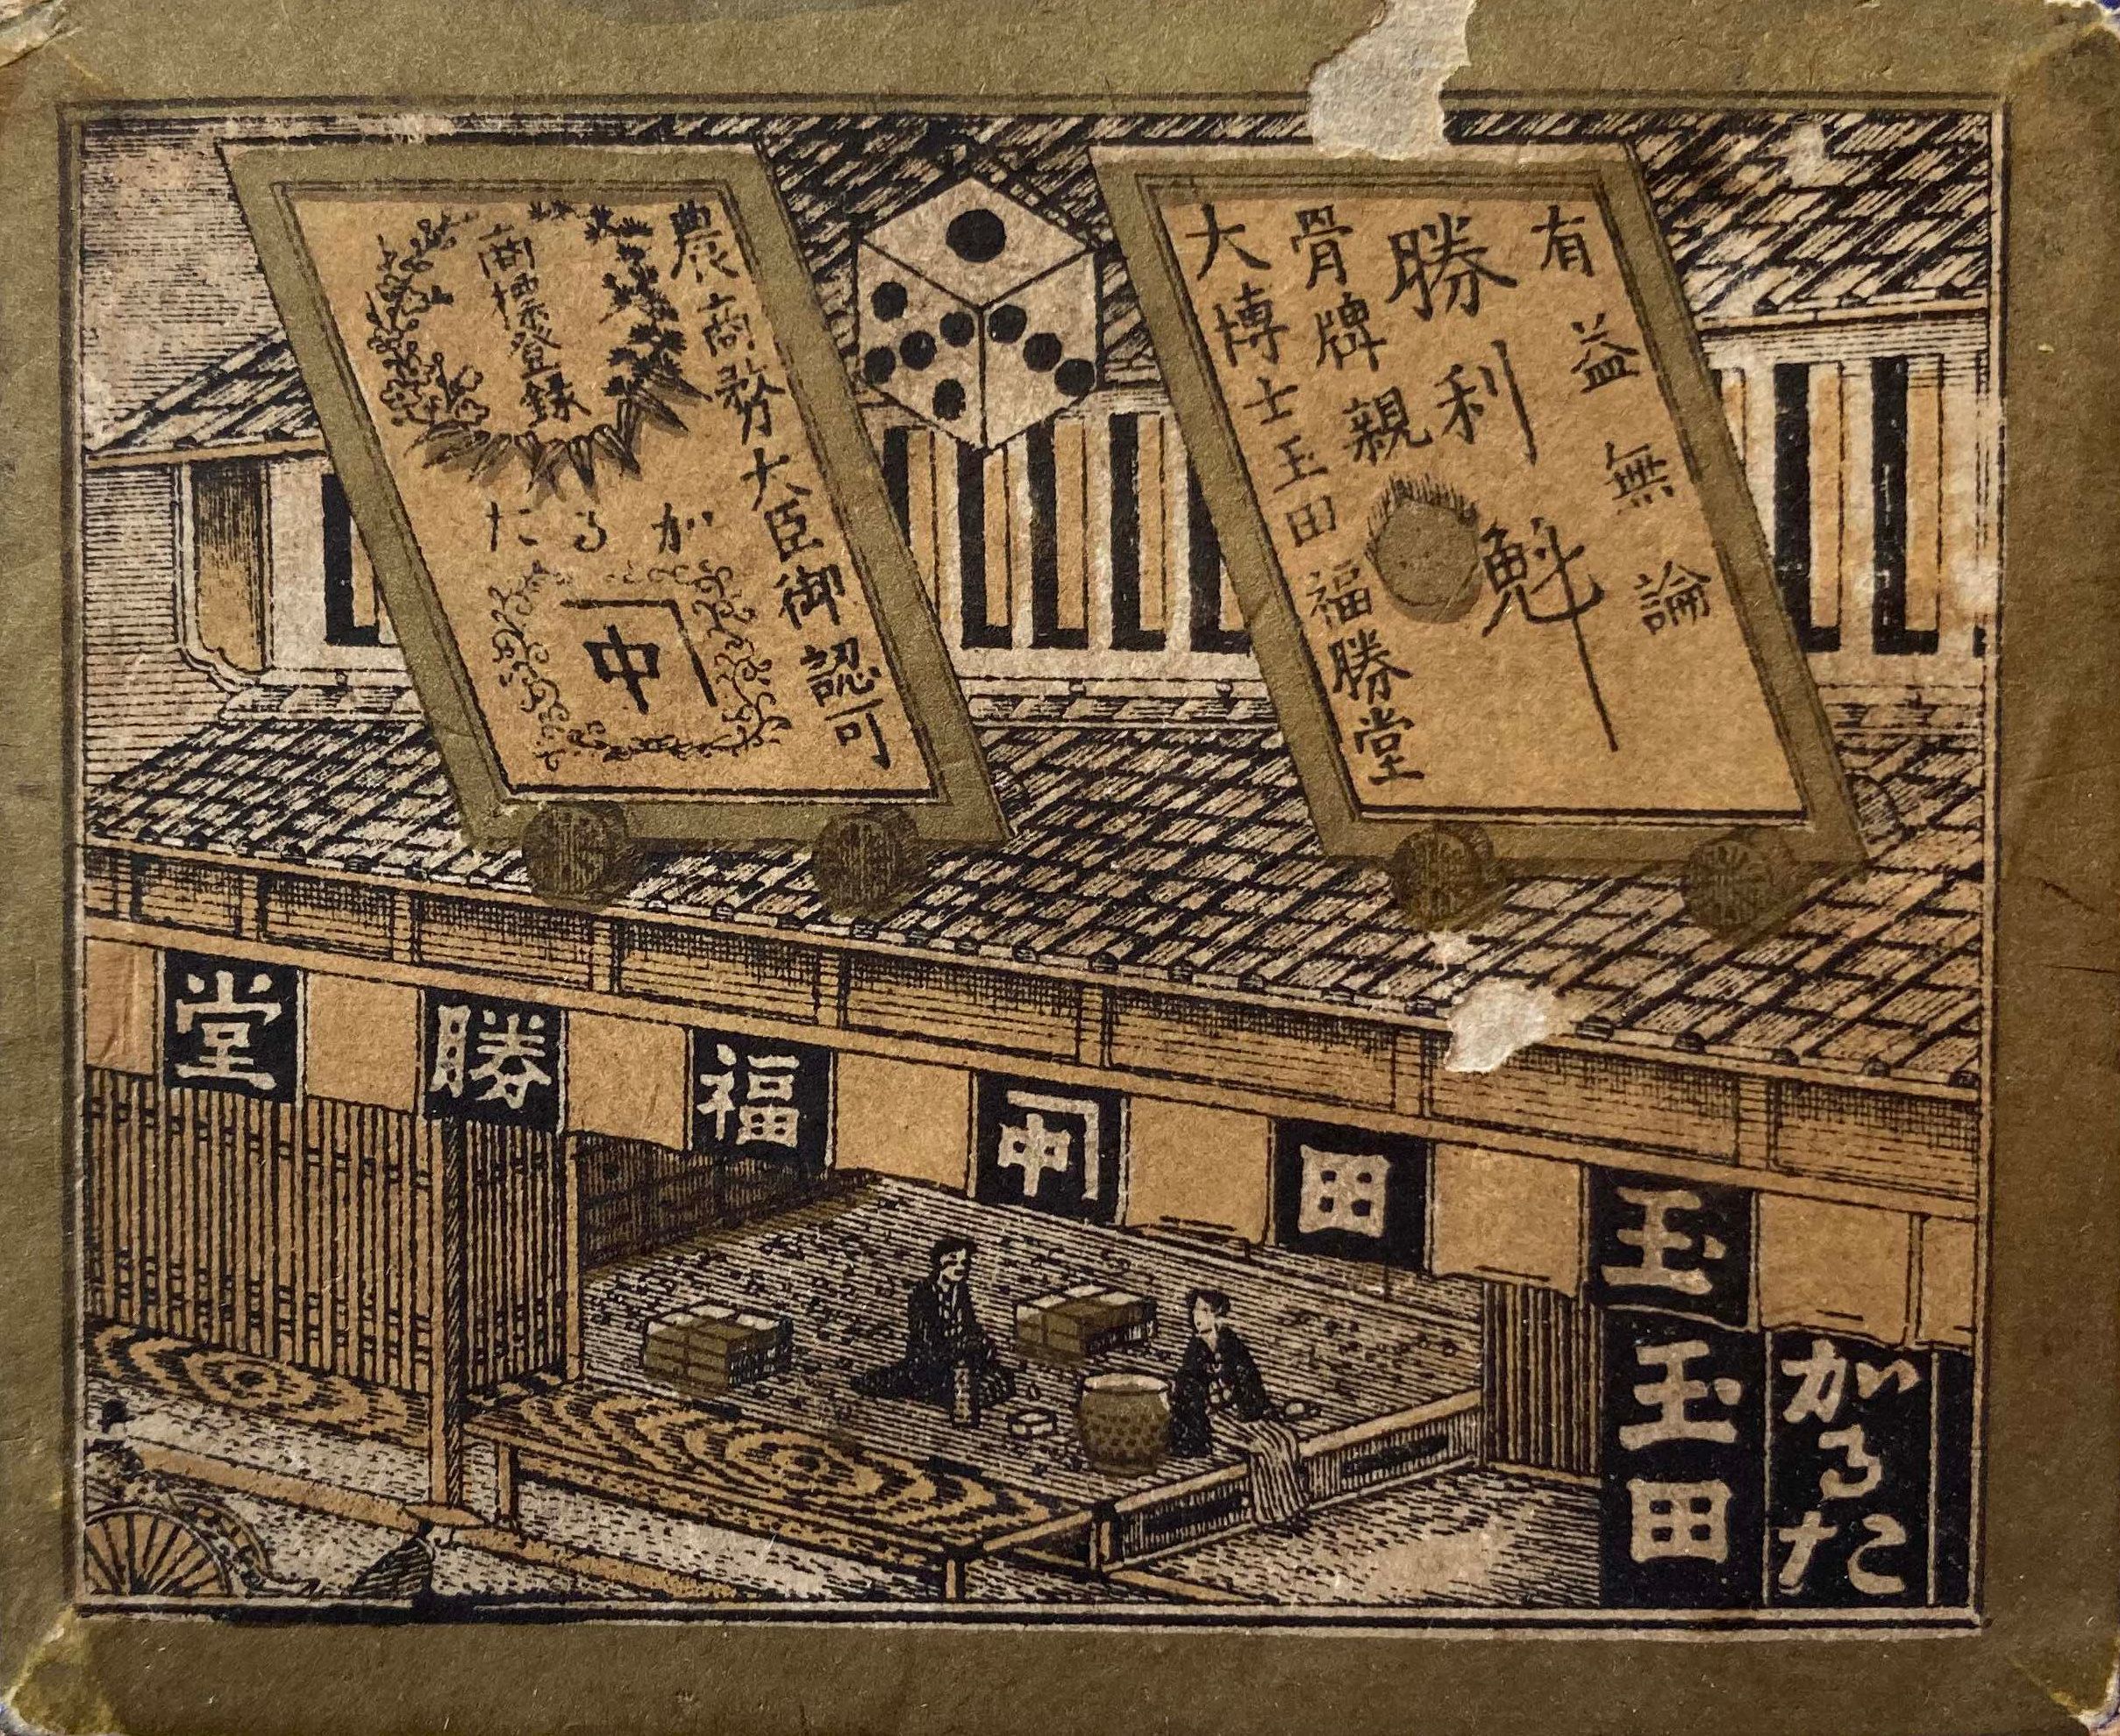 A box front depicting the storefront of a Japanese karuta manufacturer.